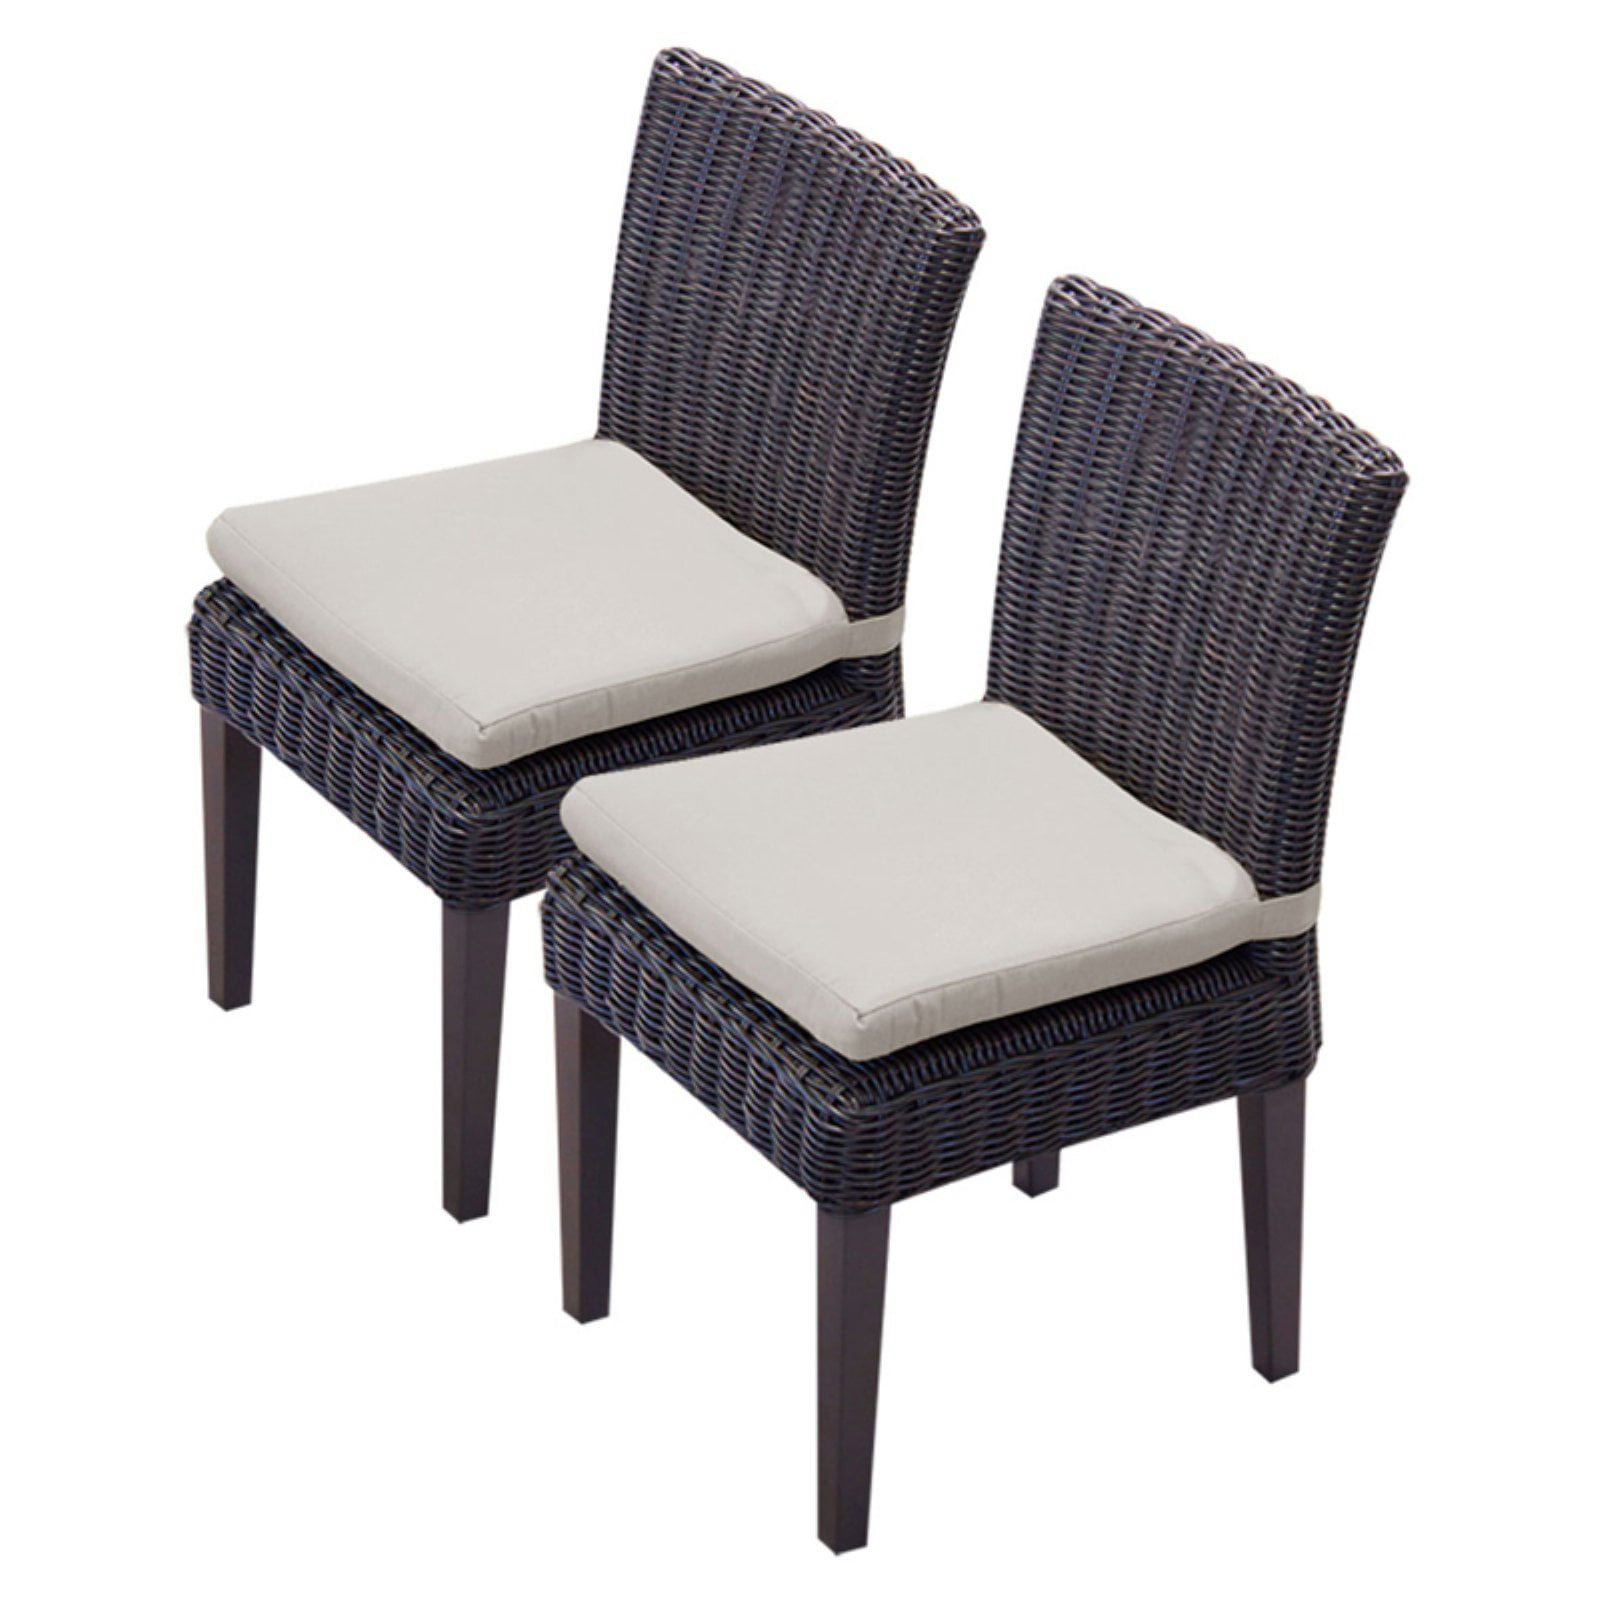 Set of 4 TK Classic Outdoor Cushion for Dining Chair in Gray 